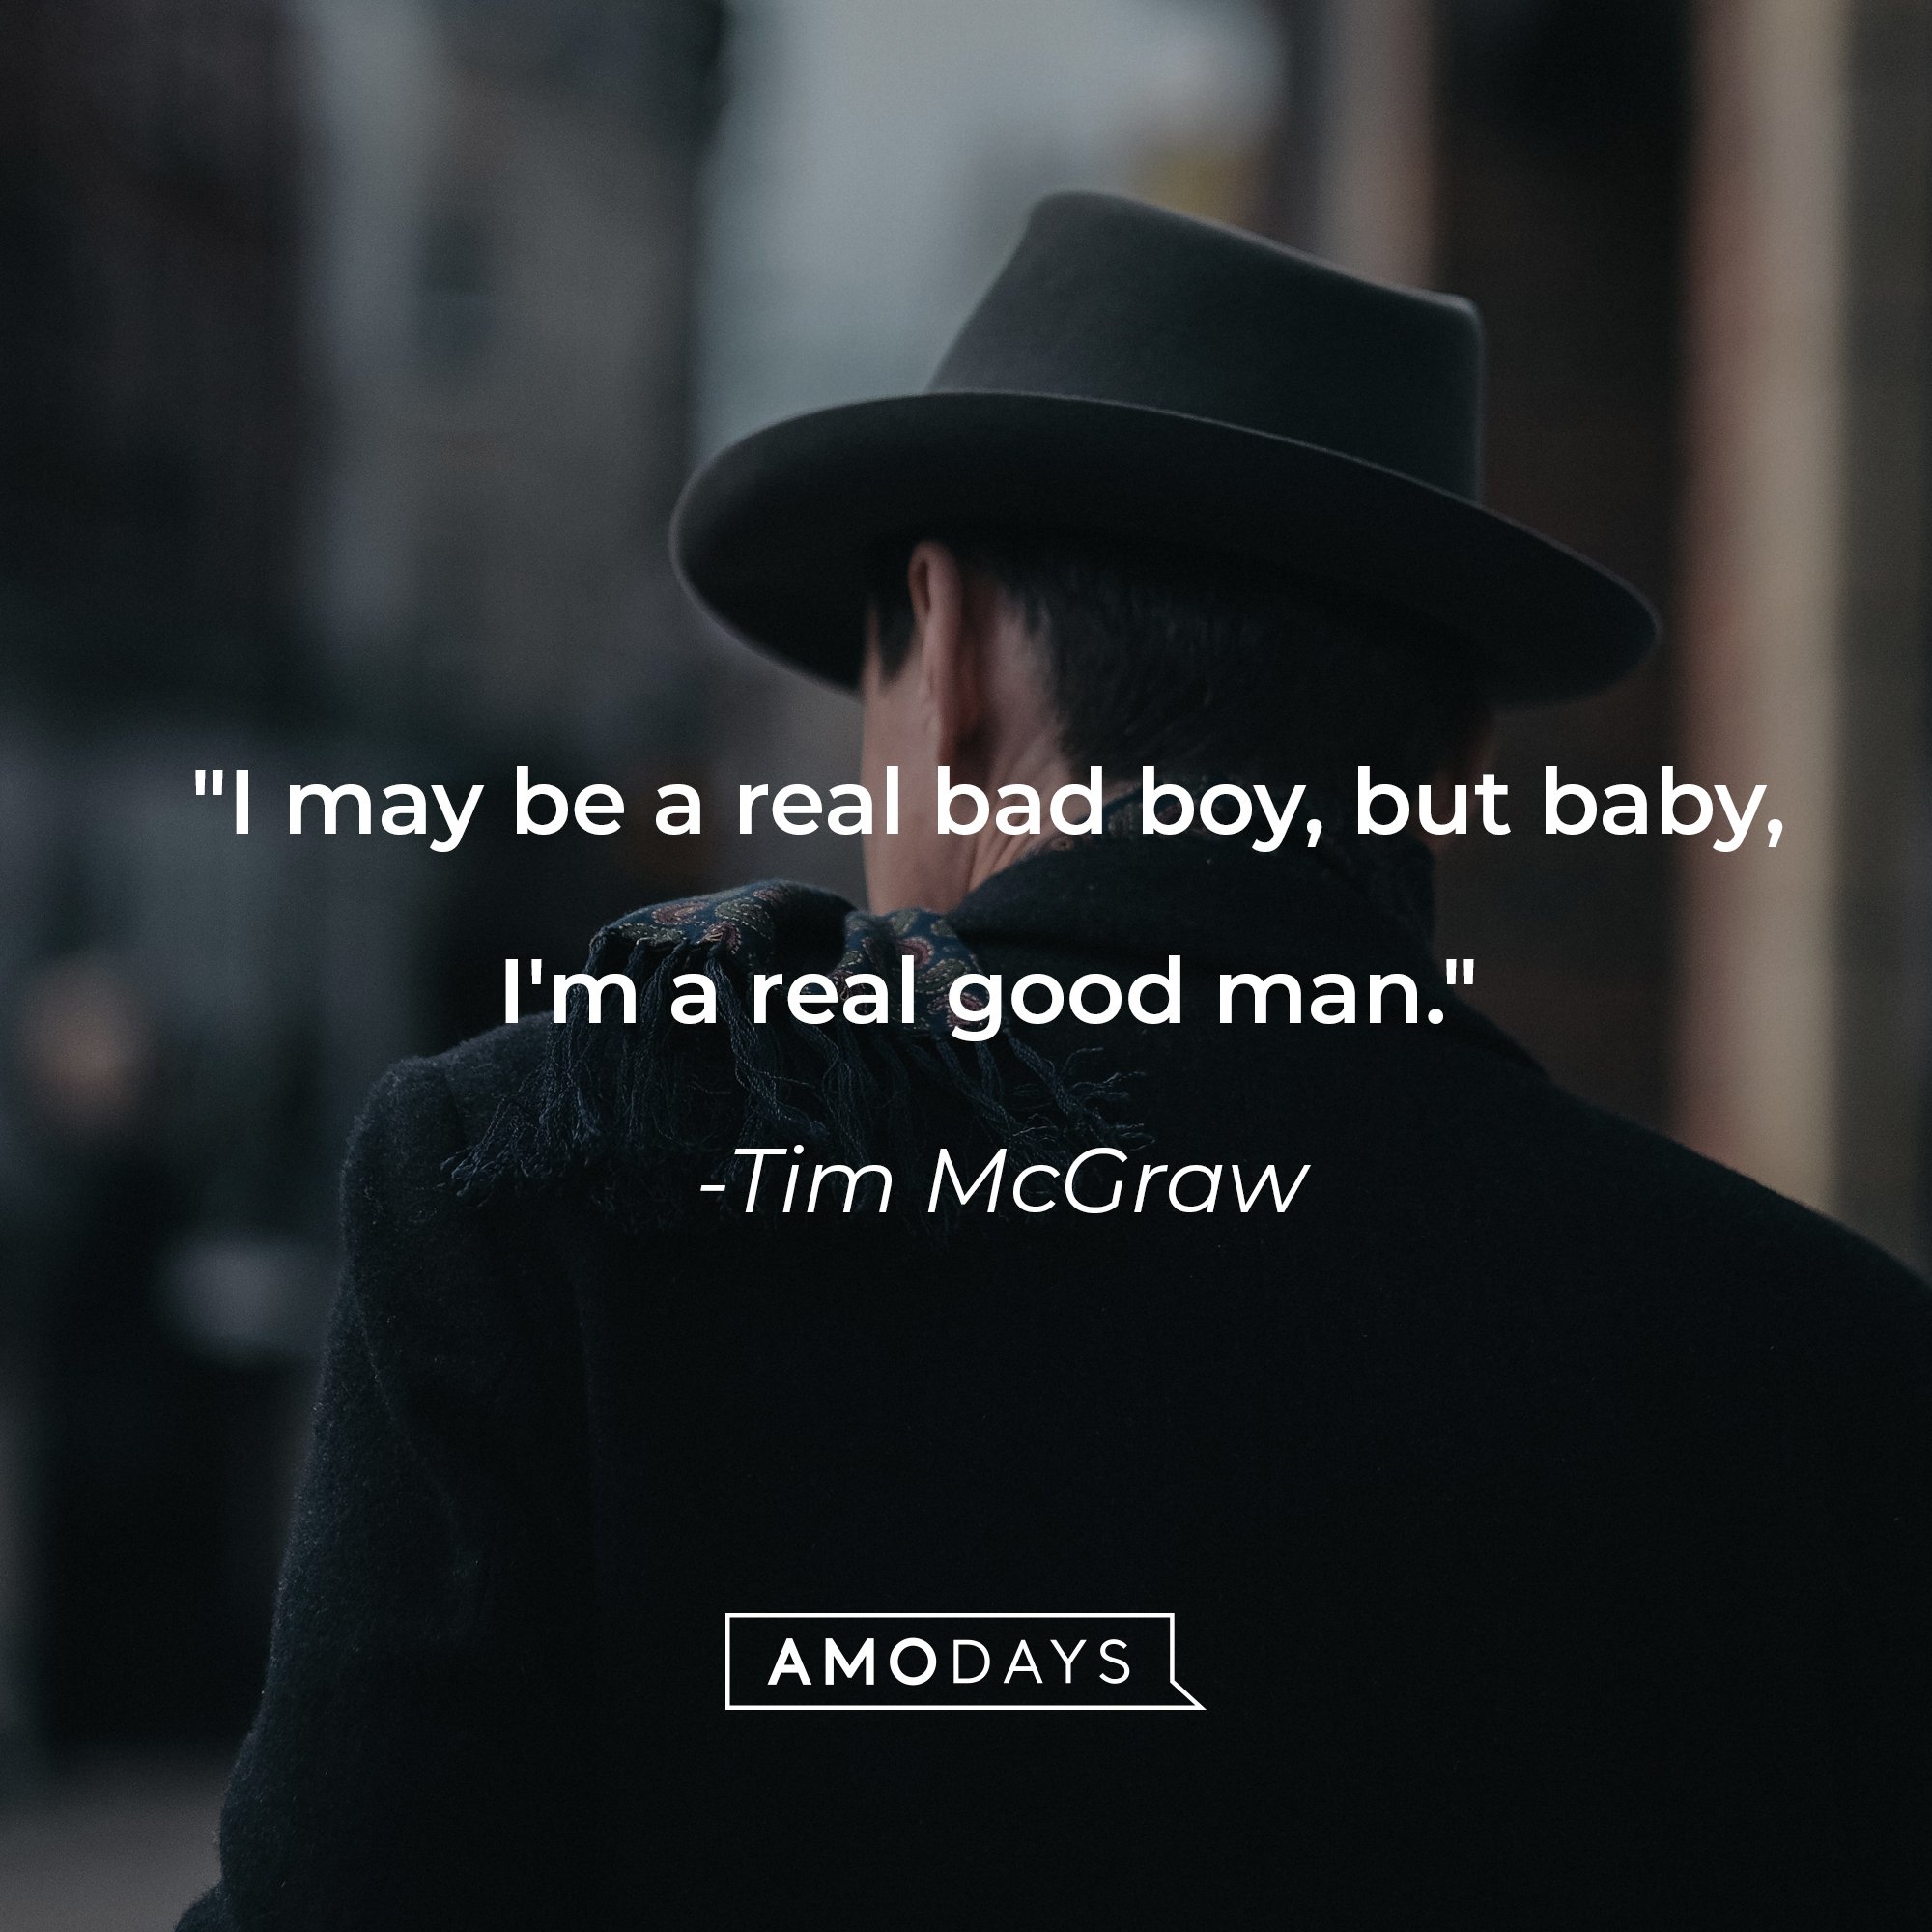 Tim McGraw's quote: "I may be a real bad boy, but baby, I'm a real good man." | Image: AmoDays